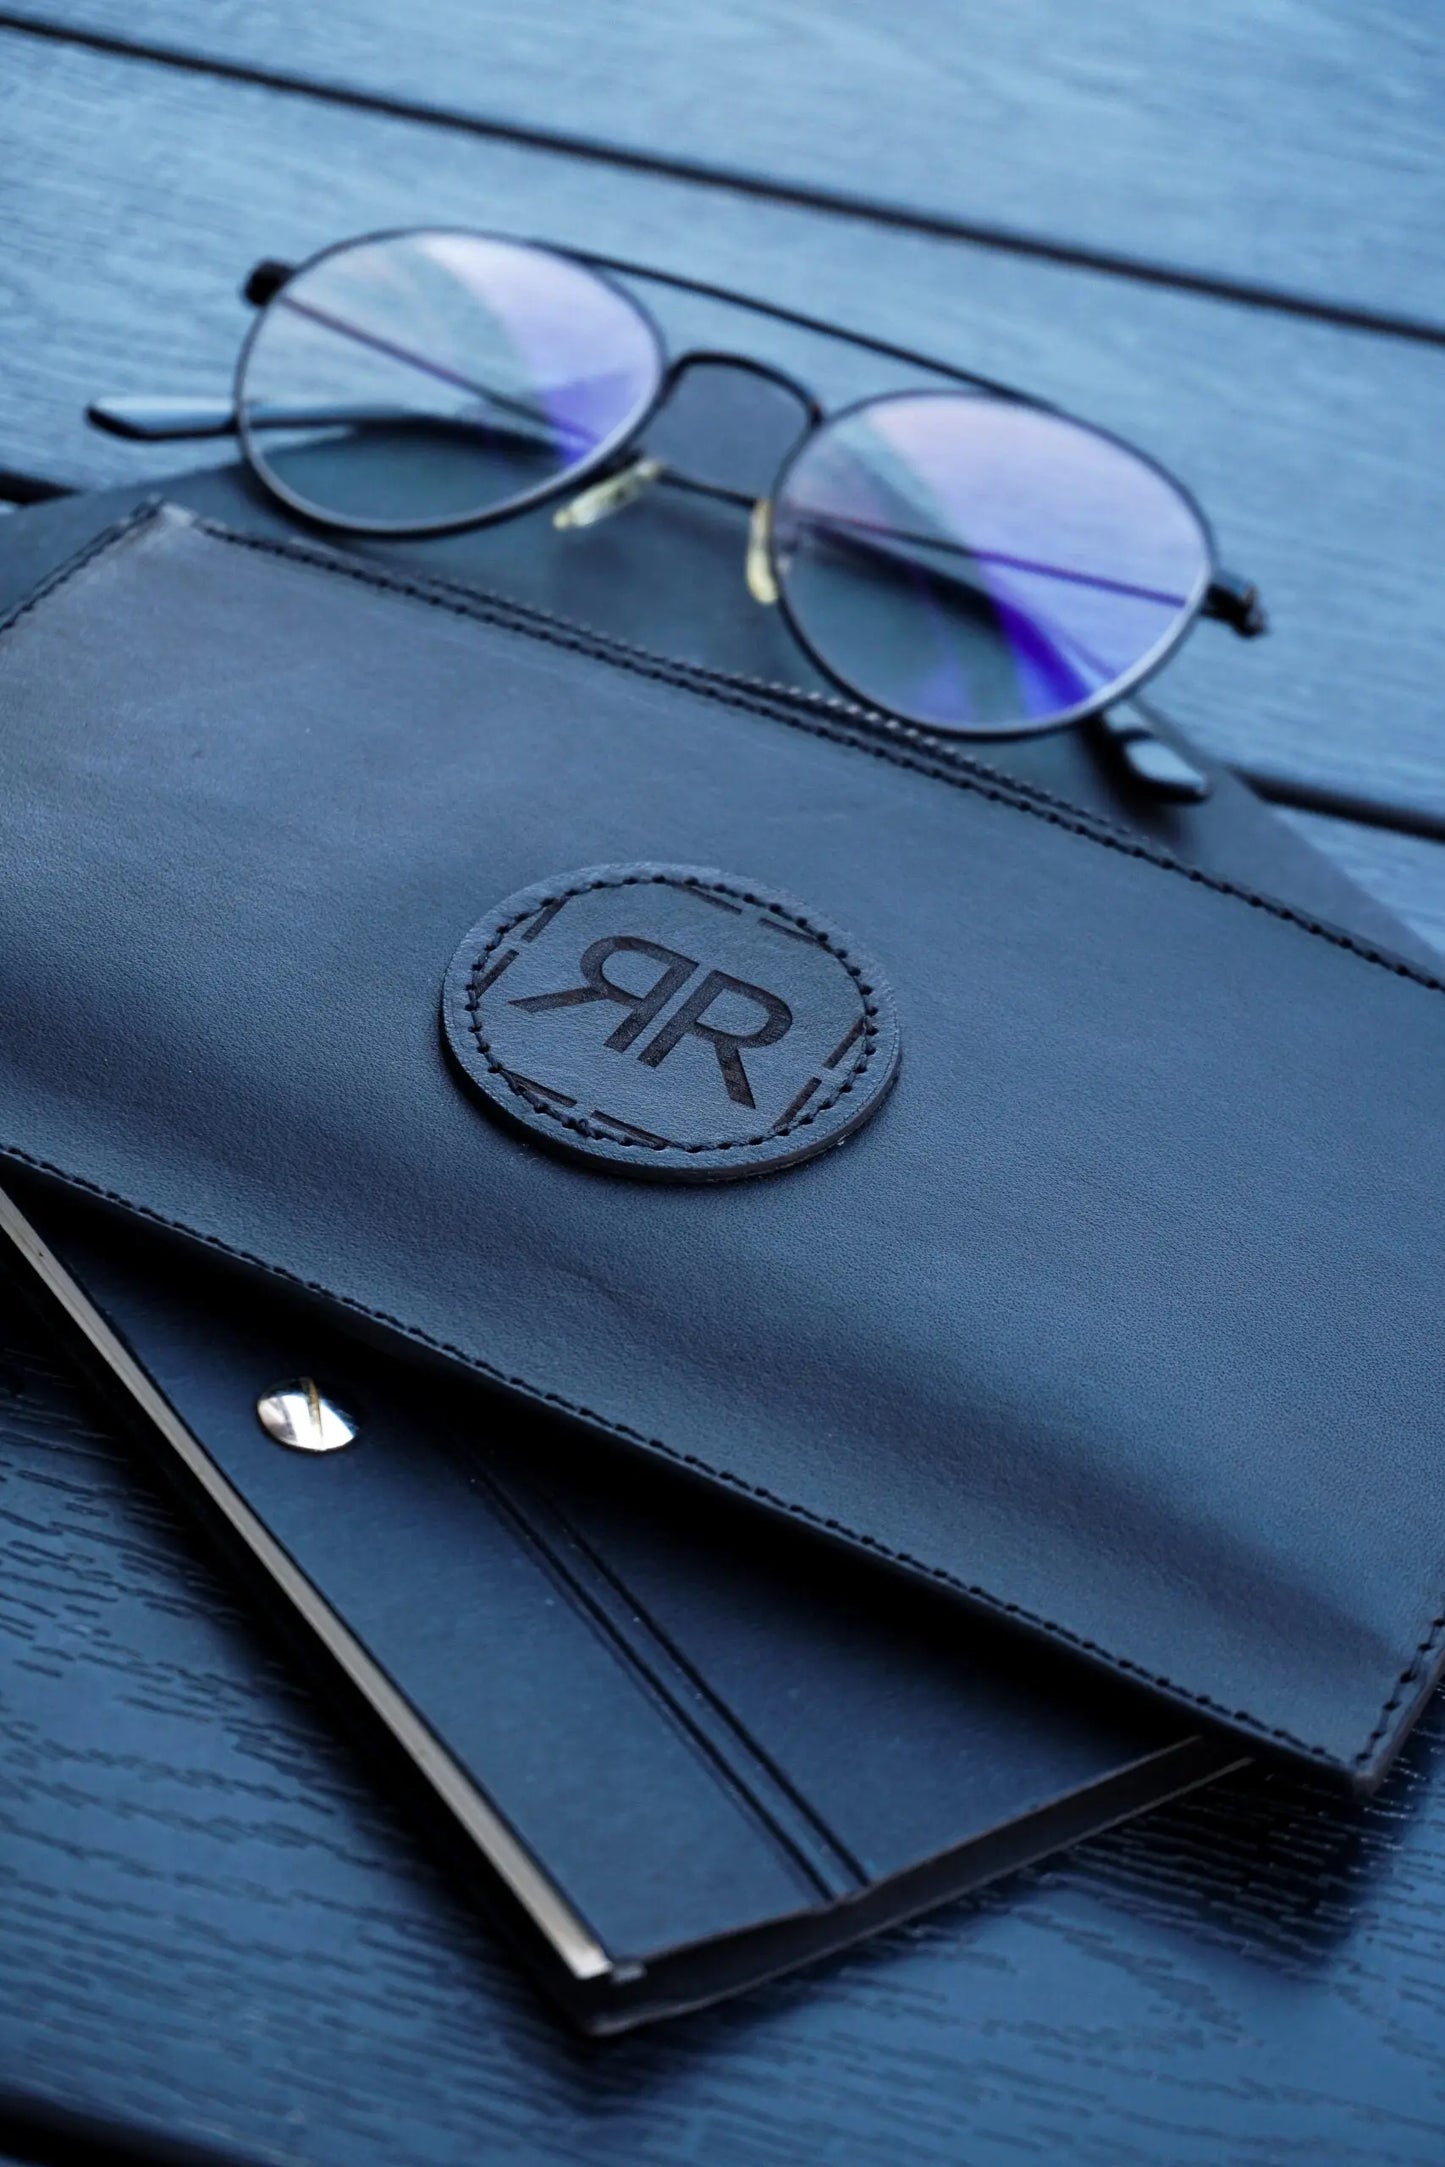 A black leather wallet with a logo and glasses on a table, showcasing a sleek design with a removable wristlet for convenience and elegance.